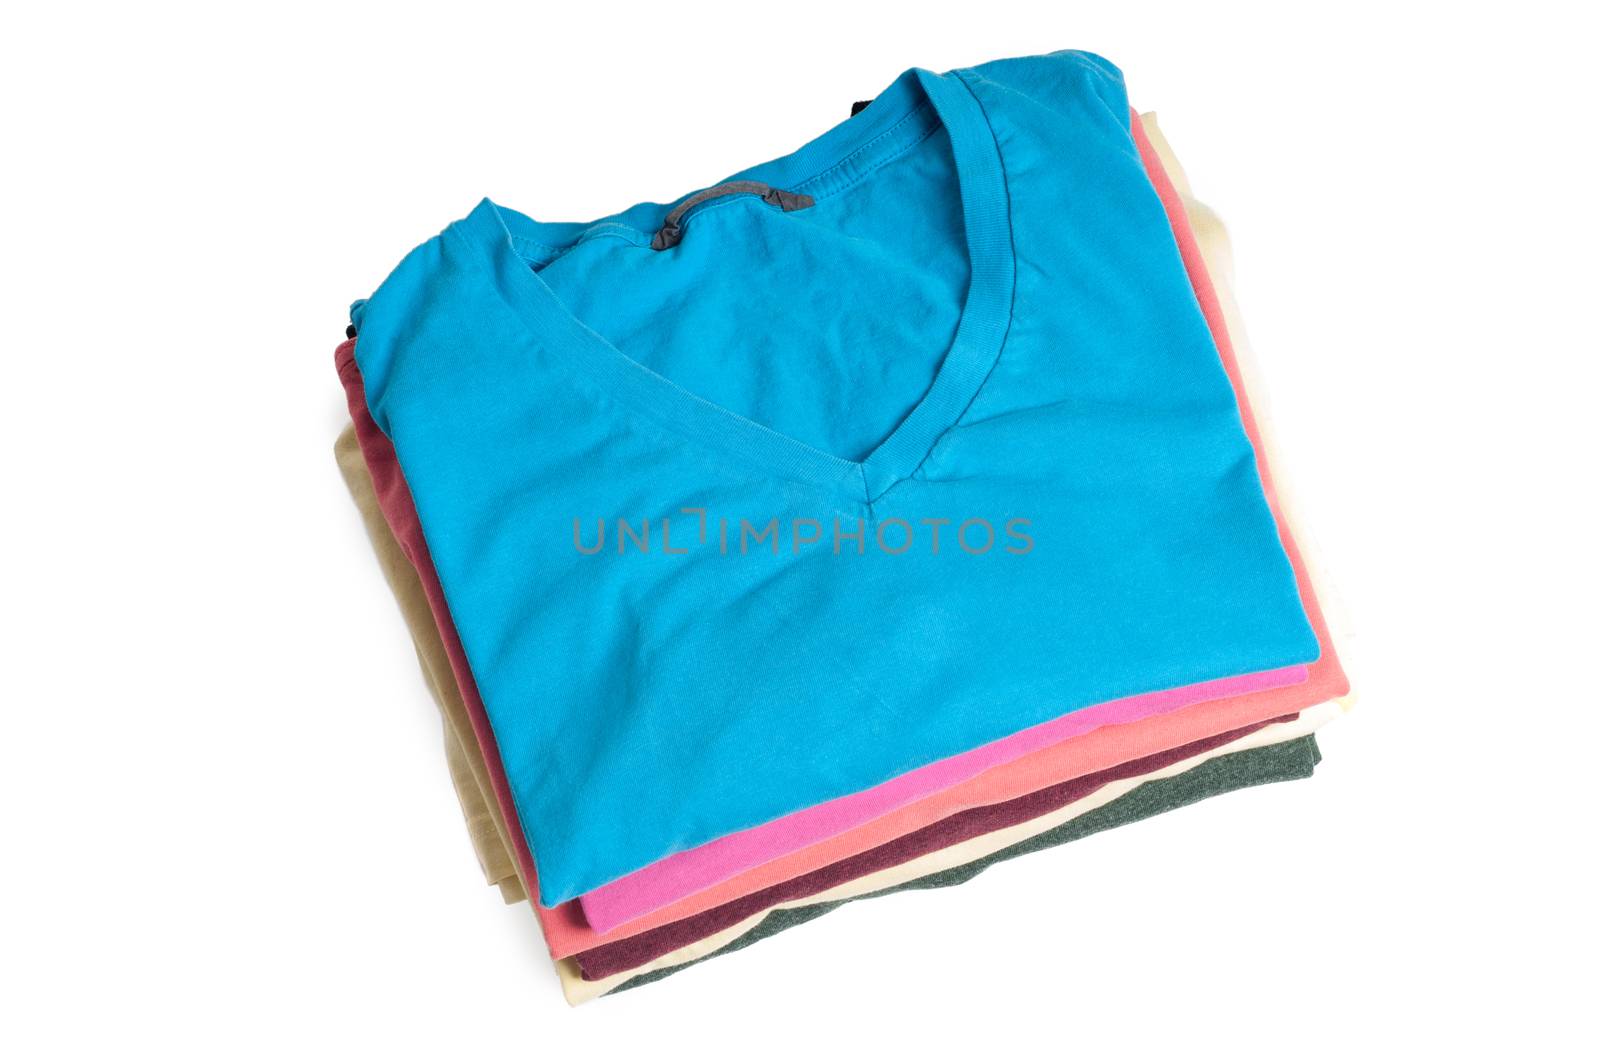 Stack of colored t-shirts on the light background